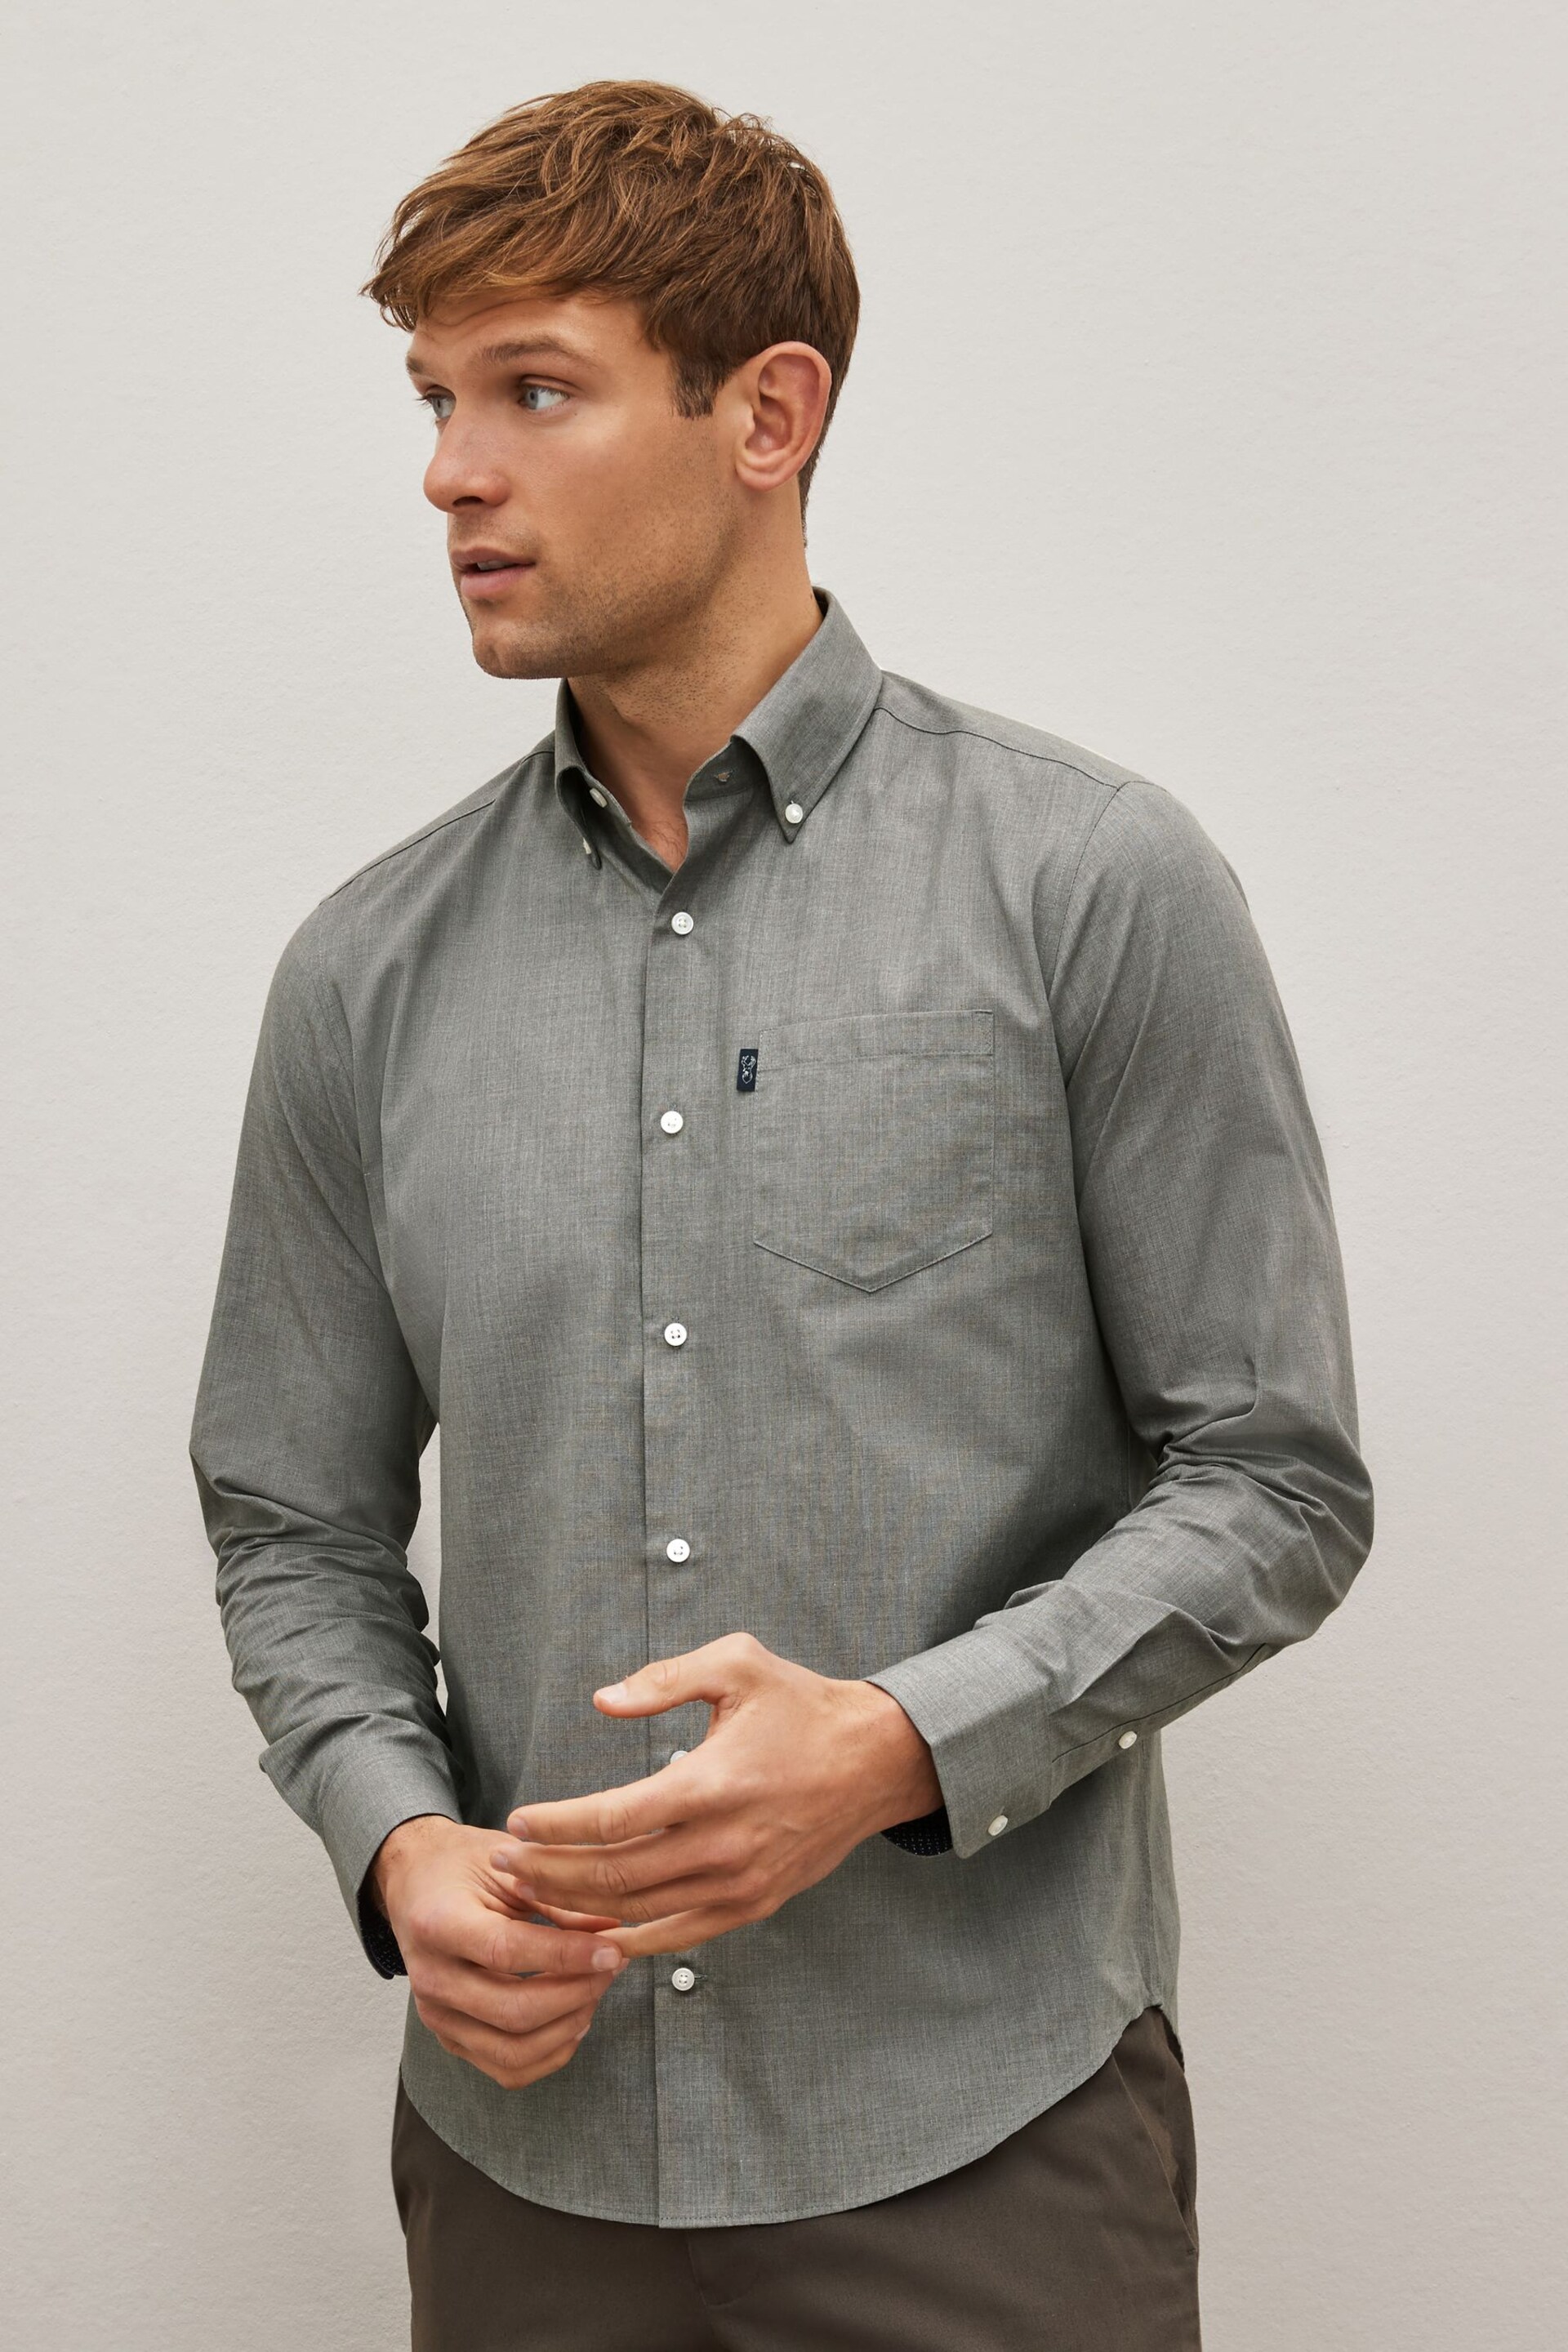 Grey Marl Regular Fit Easy Iron Button Down Oxford Shirt - Image 1 of 8